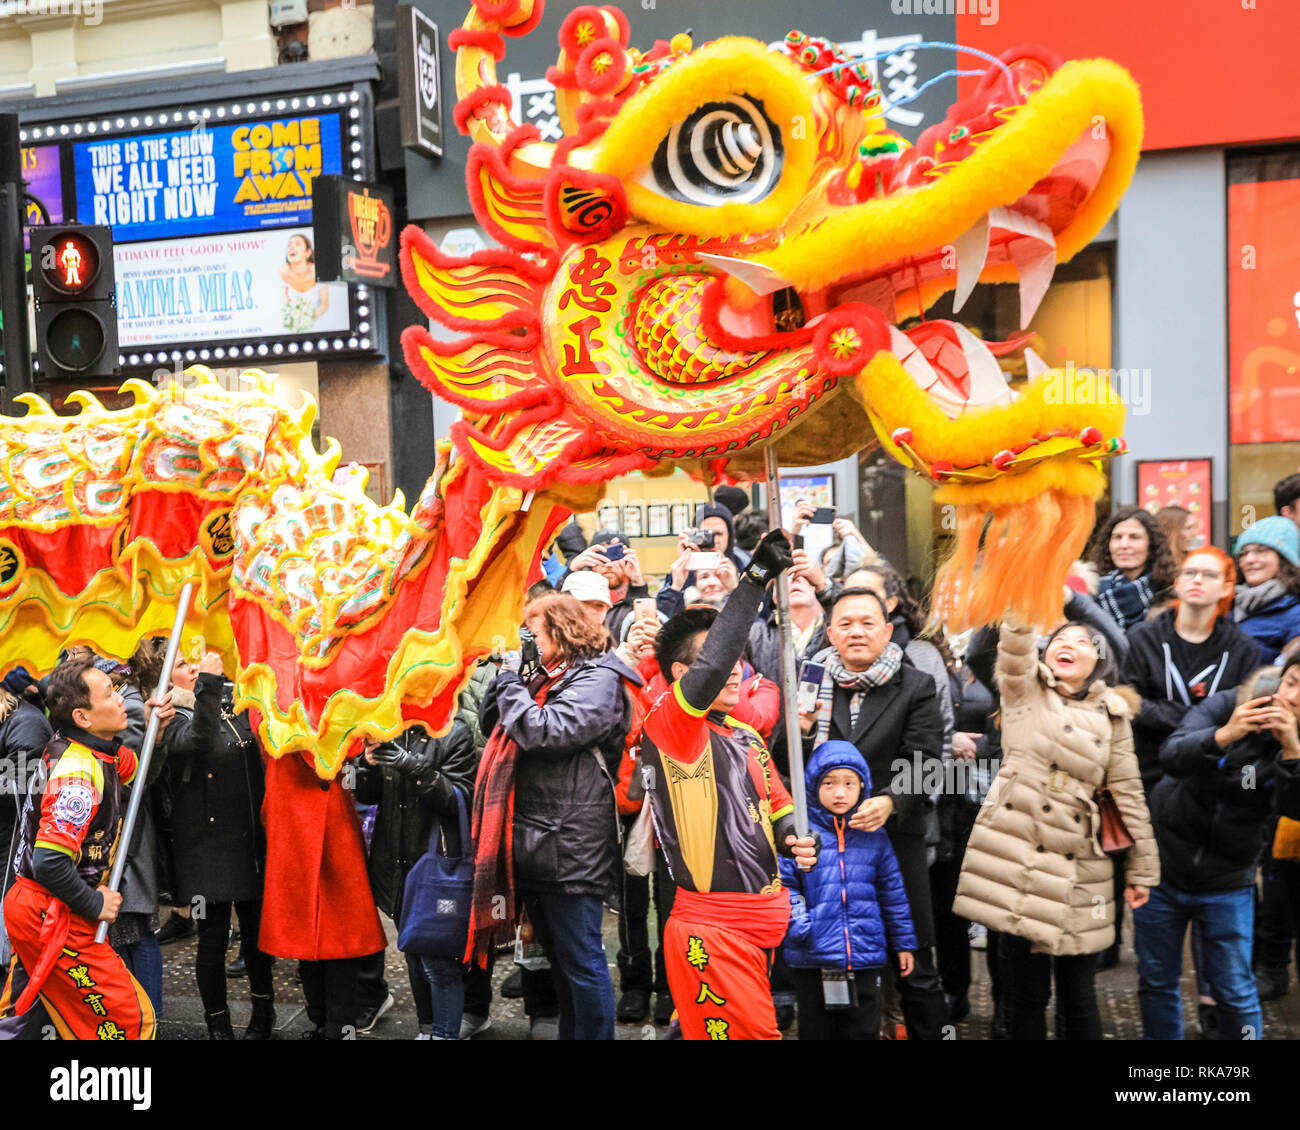 London, UK 10th Feb 2019. The dragon at the front of the procession. The performers make their way through Soho. London's Chinese New Year celebrations, the largest outside Asia, take place with colourful parades, lion and dragon dances, a procession through Soho, cultural performances and displays in and around Chinatown, the West End and Trafalgar Square. 2019 welcomes the Year of the Pig. Credit: Imageplotter News and Sports/Alamy Live News Stock Photo